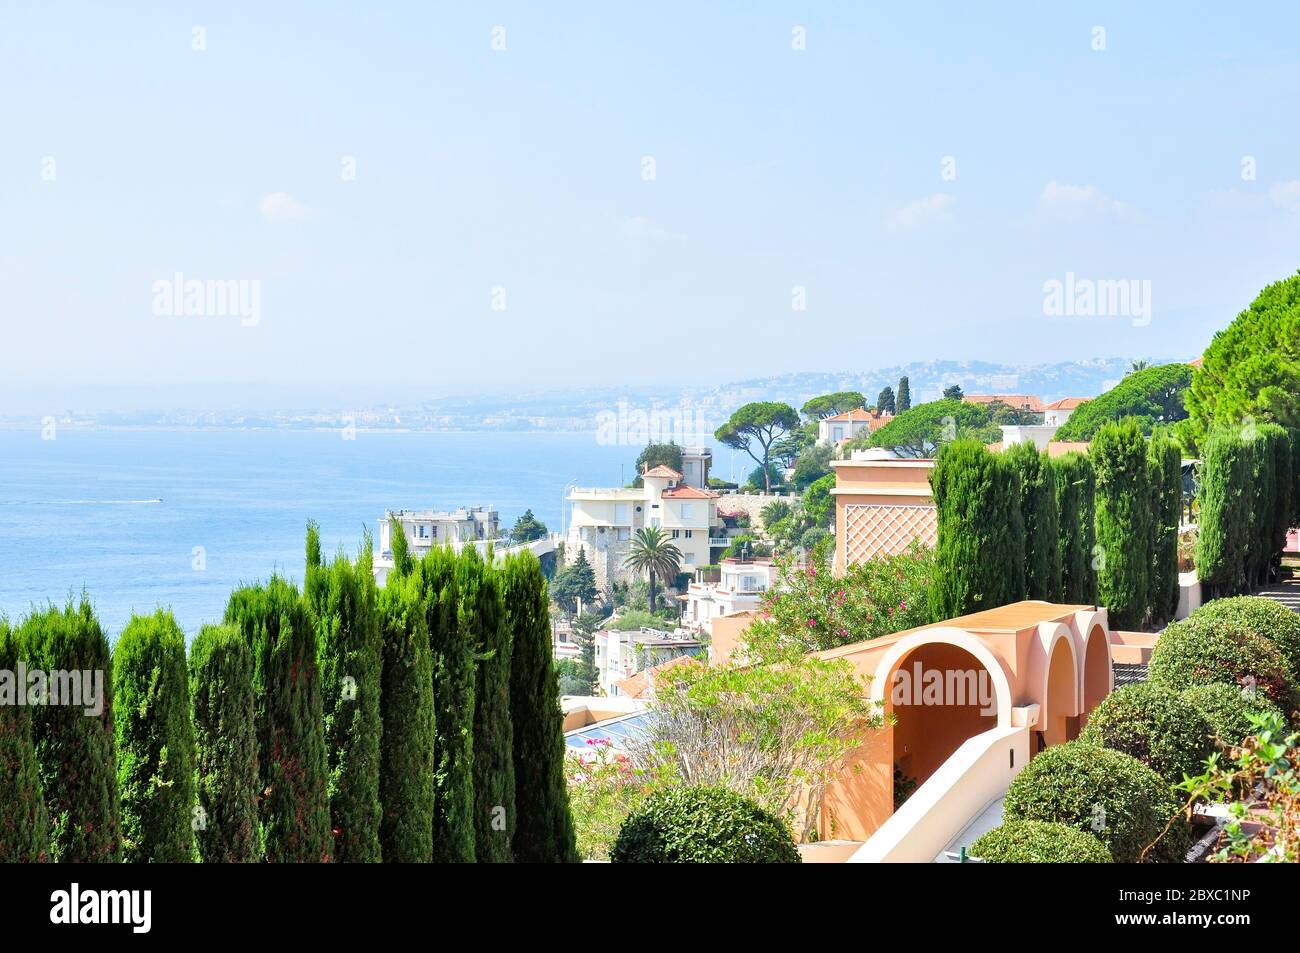 A view from Boulevard Maurice Maeterlinck of the buildings below on Le Cap de Nice and Nice in the distance, France Stock Photo